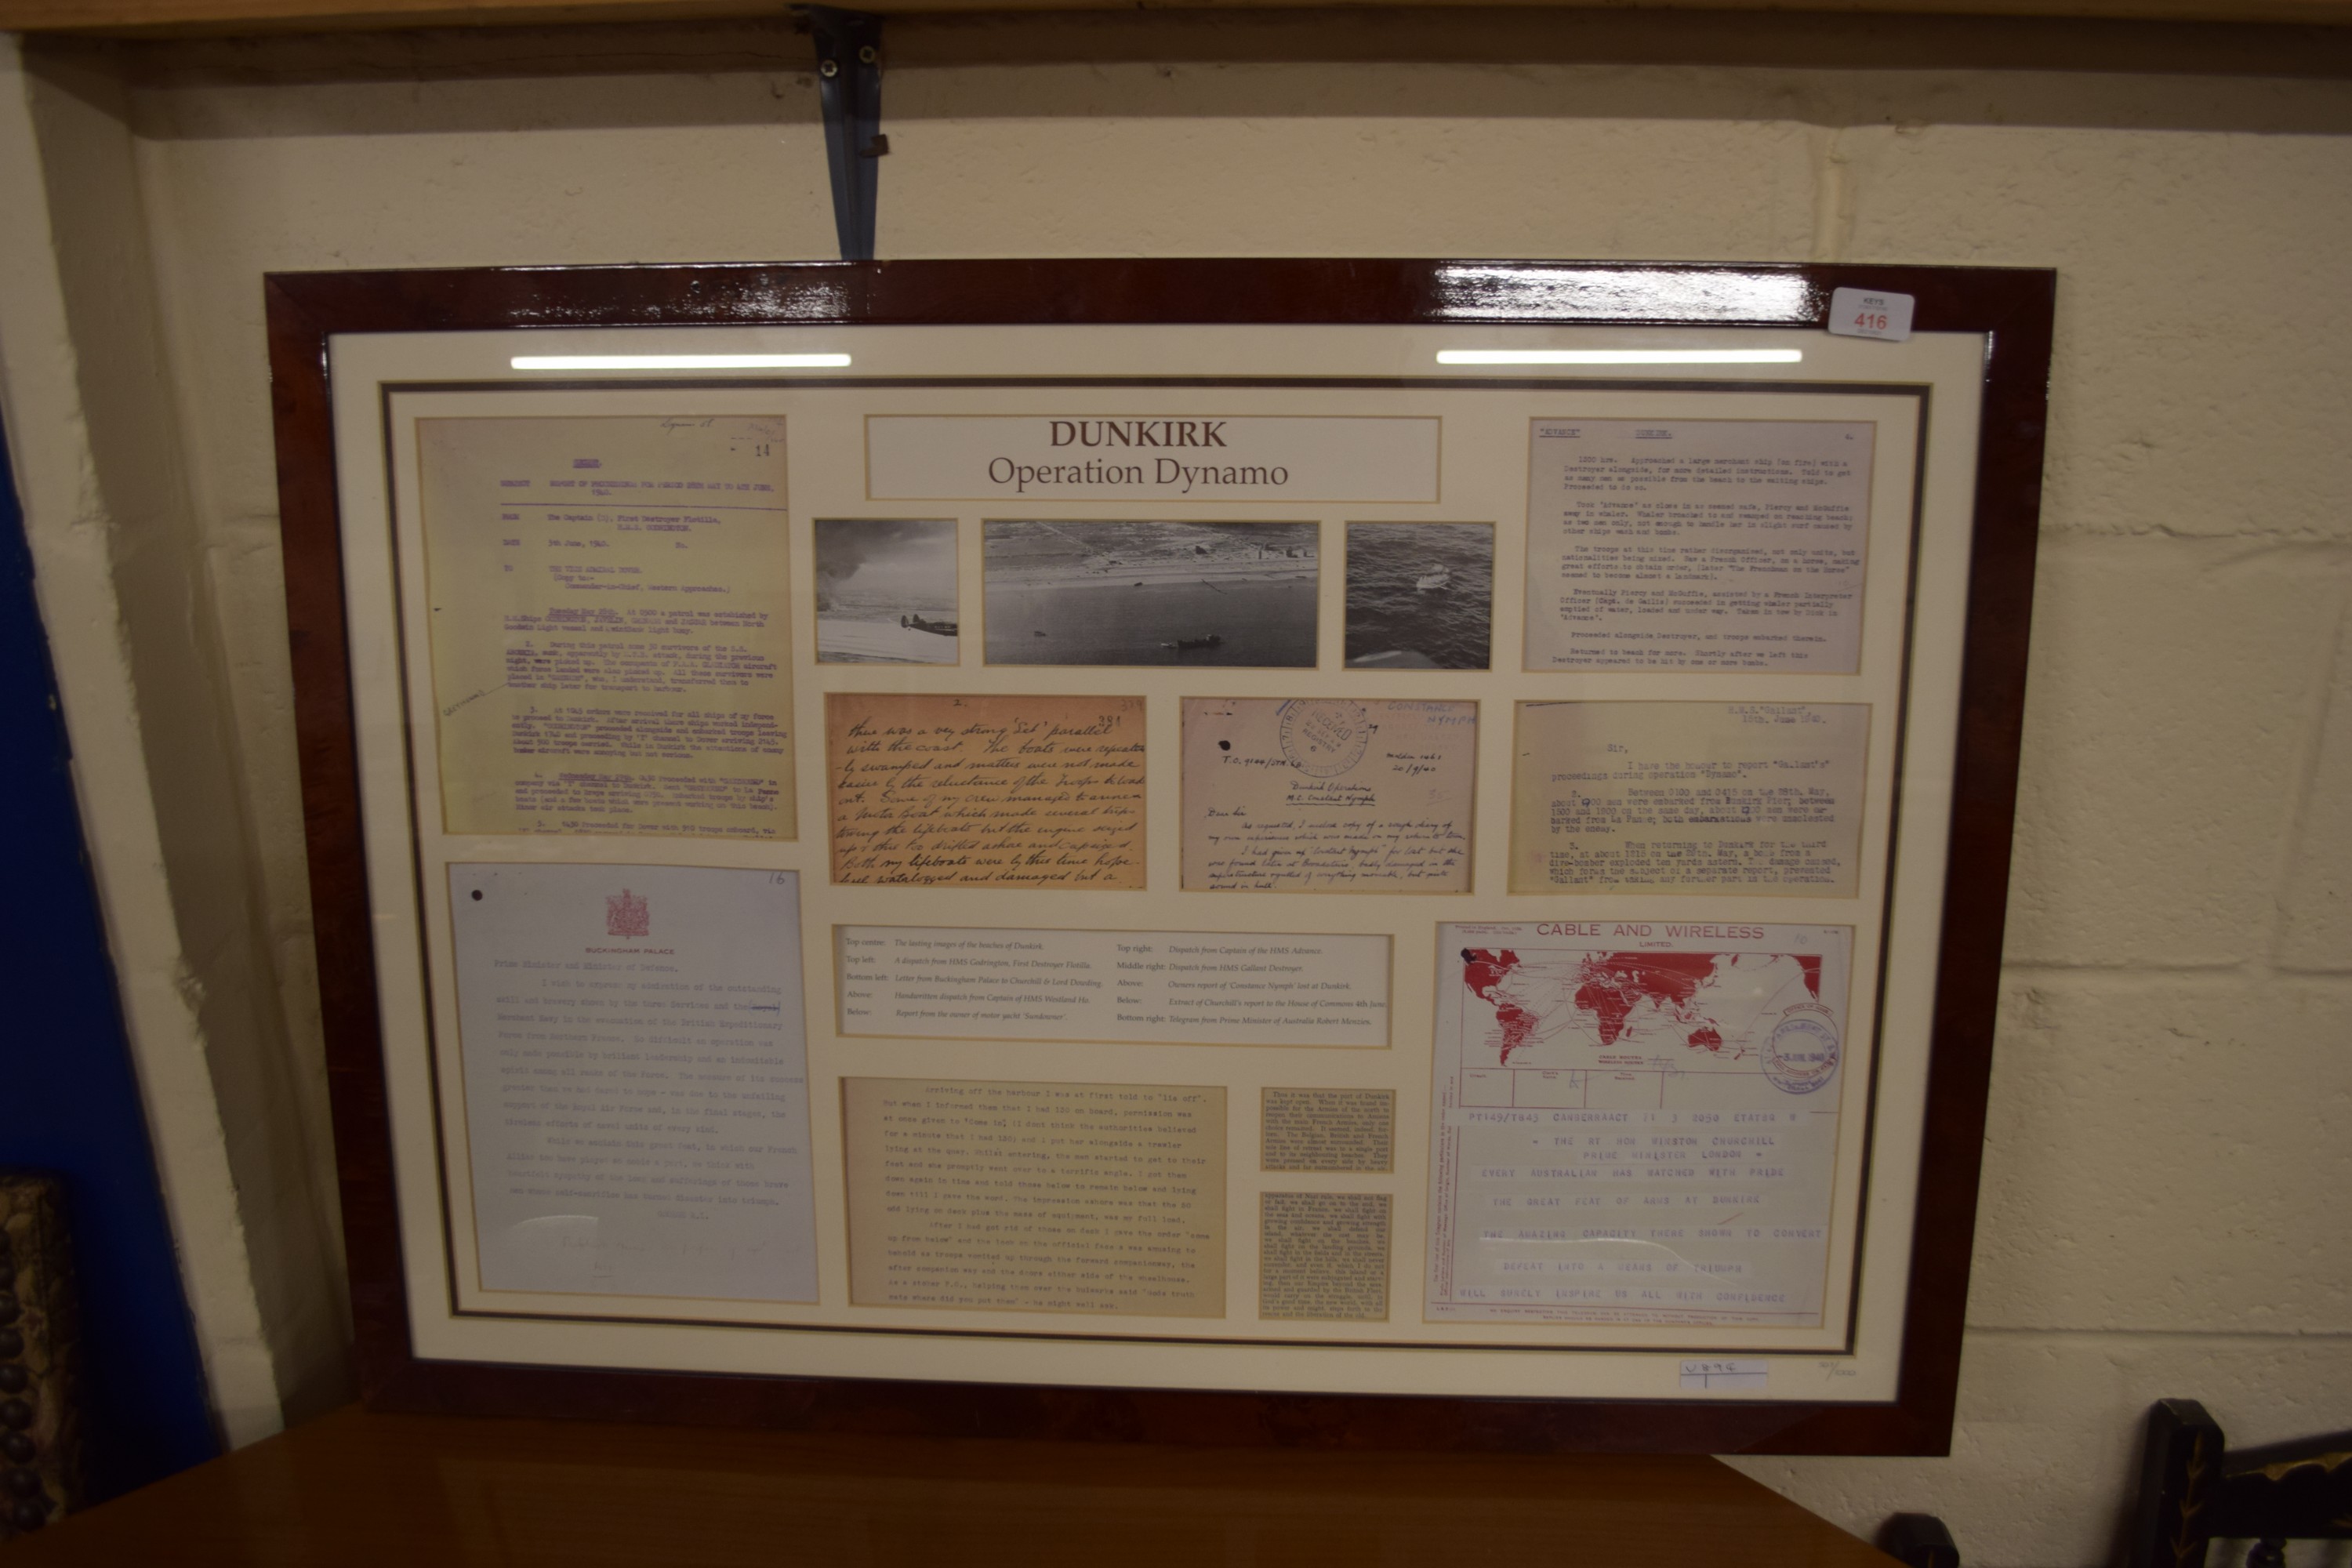 FRAMED REPRODUCTION OF EPHEMERA RELATING TO OPERATION DYNAMO DUNKIRK, FRAME SIZE APPROX 86CM,